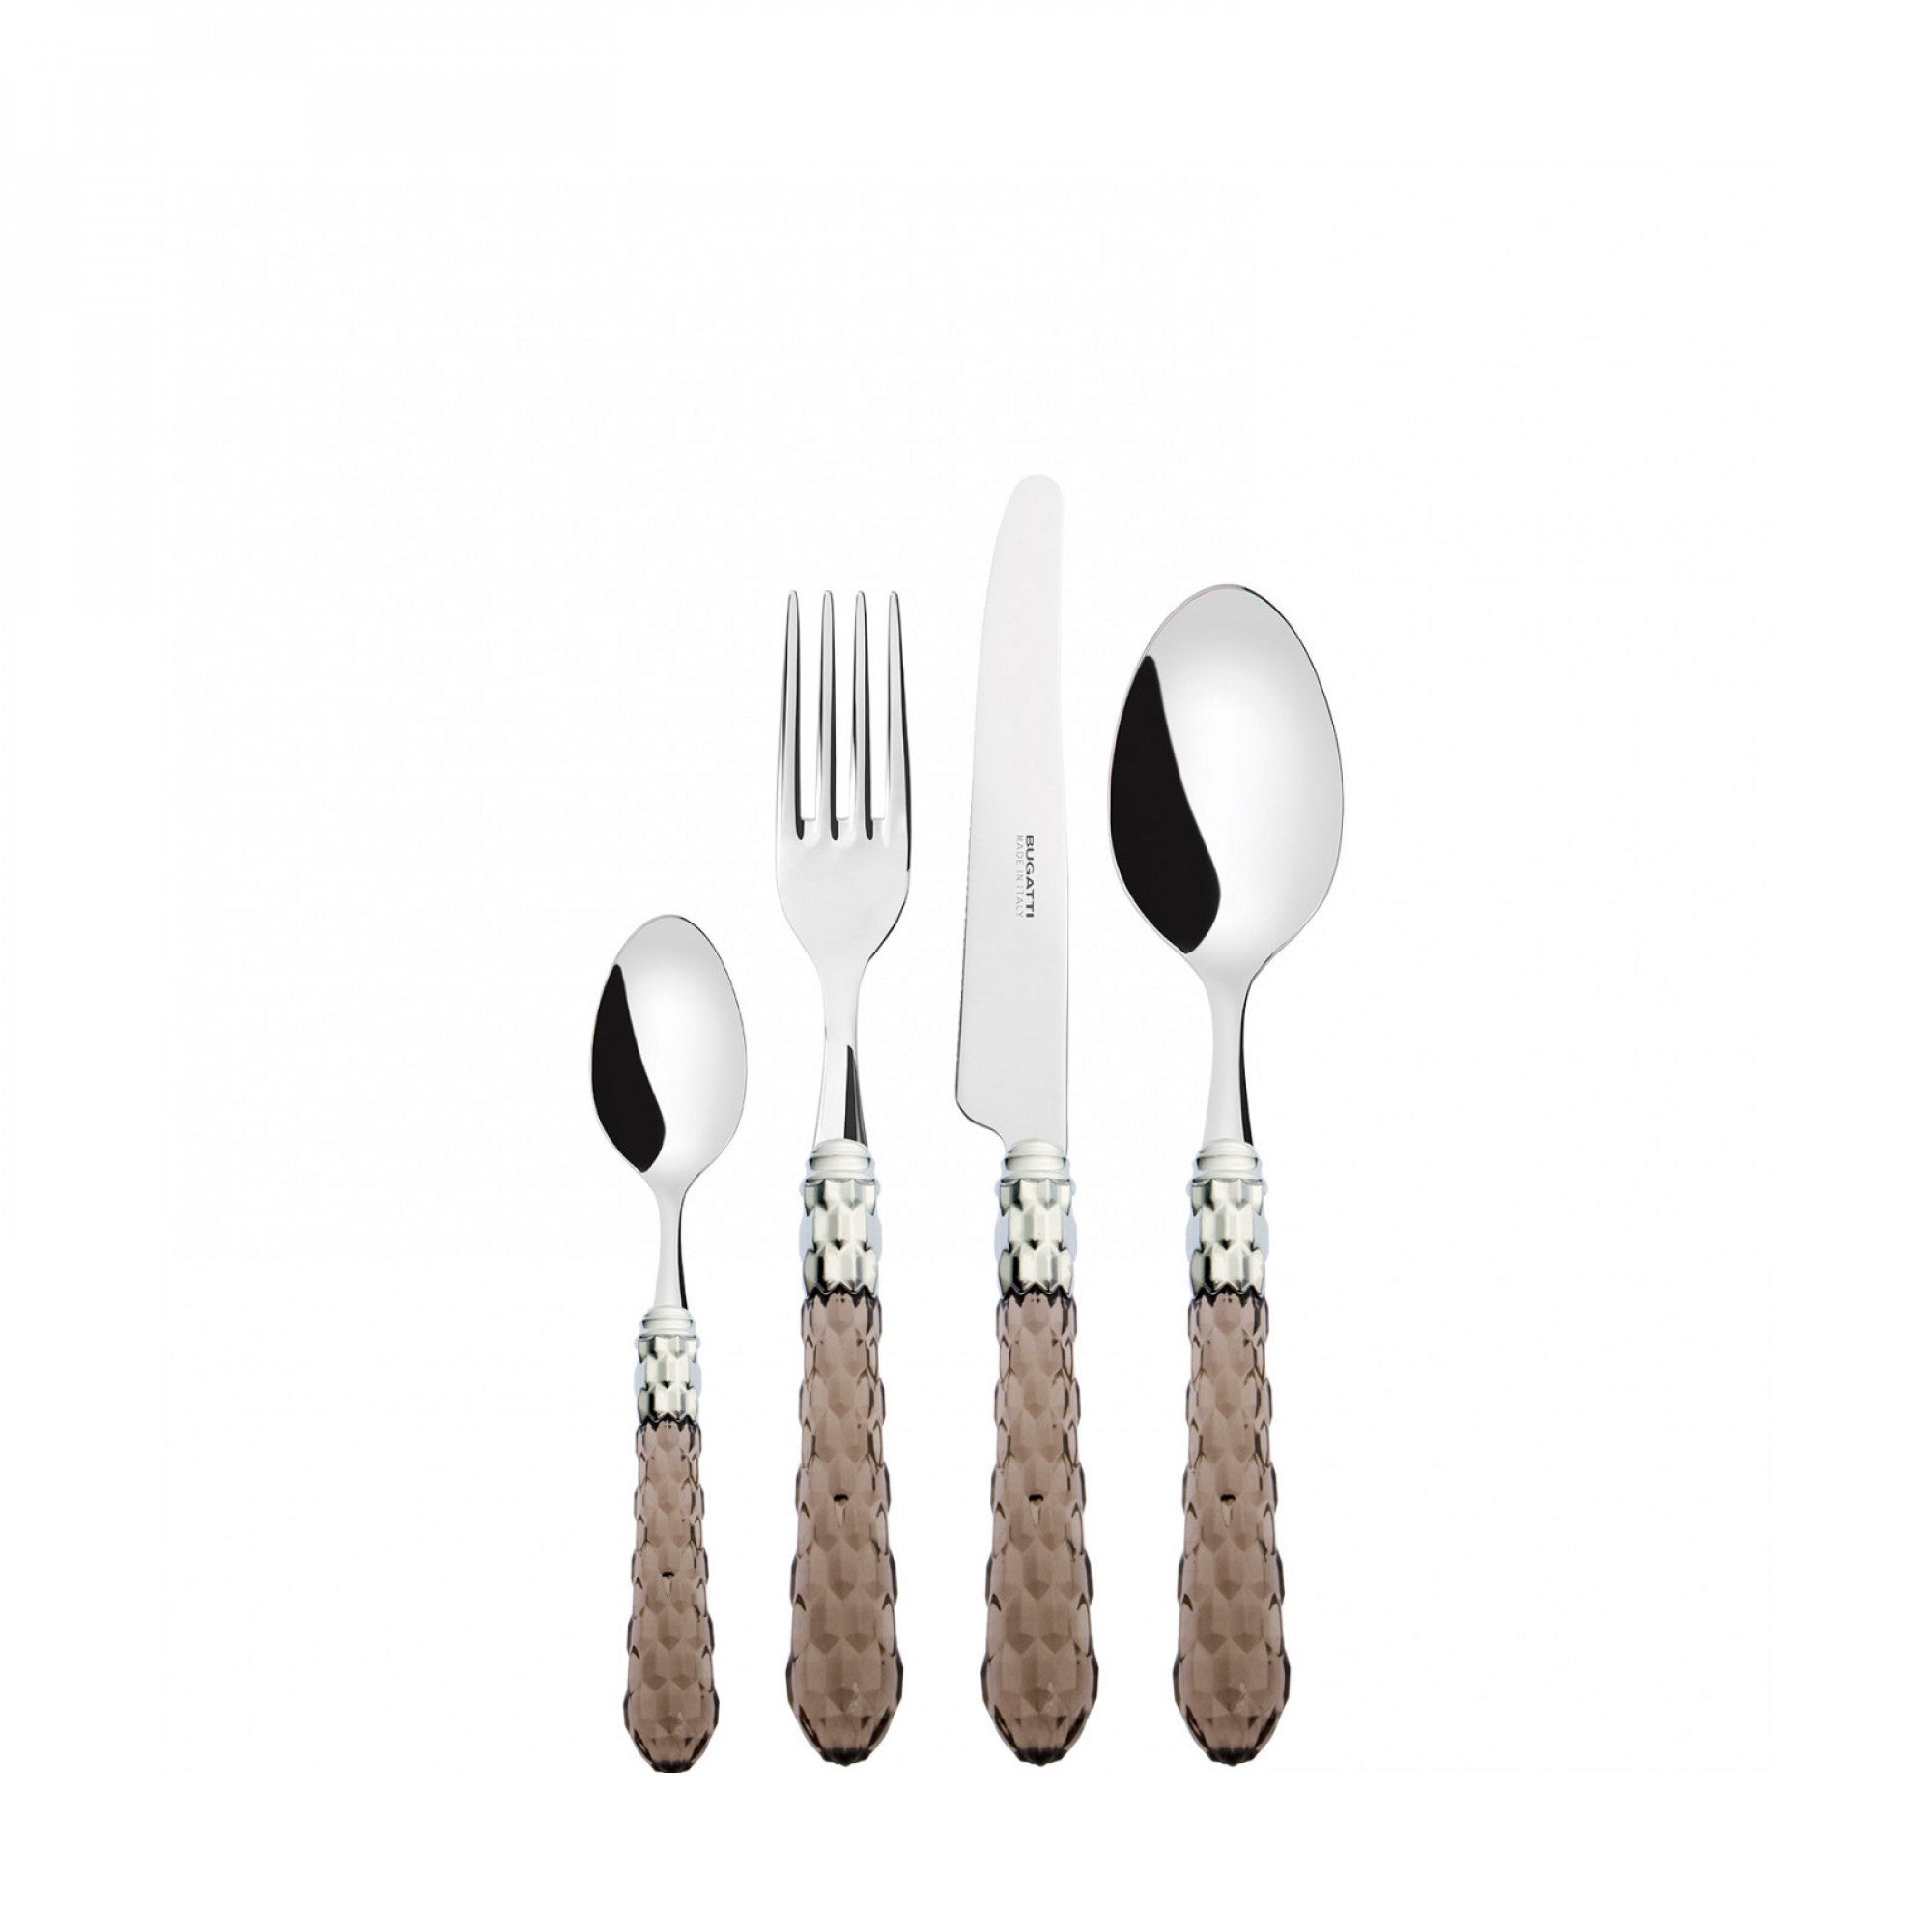 BUGATTI, Crystal, 24-piece cutlery set in 18/10 stainless steel with chromed ring. Packaged in a compact lithographed box